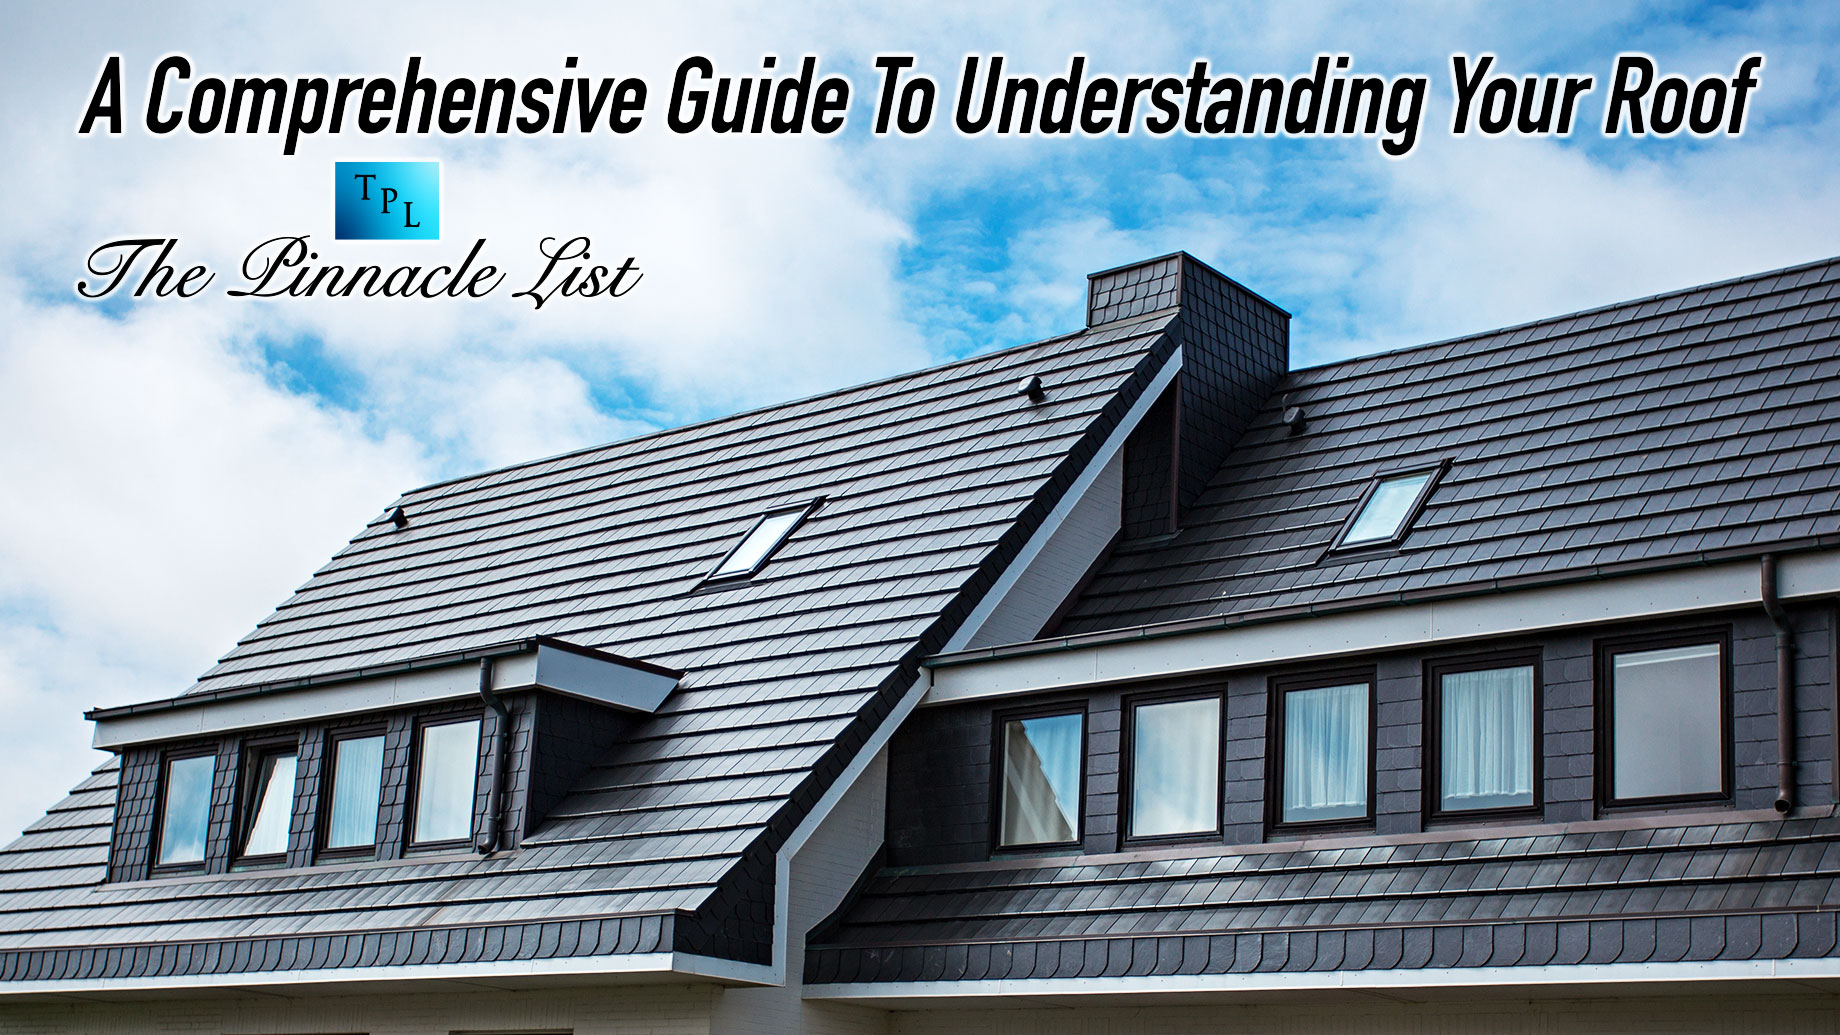 A Comprehensive Guide To Understanding Your Roof